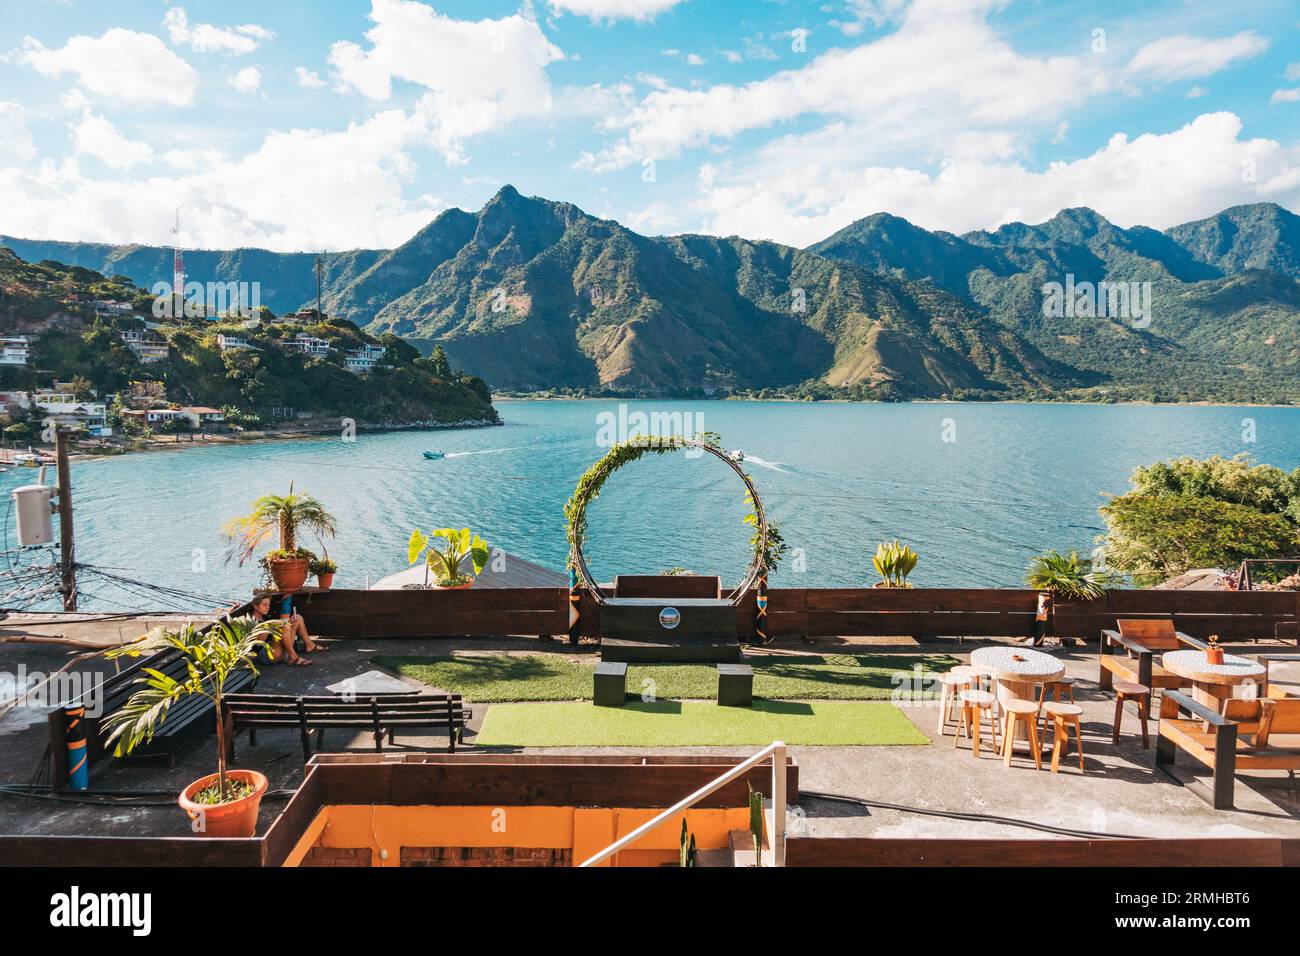 a view from a hotel balcony in the town of San Pedro on the shores of Lake Atitlan, Guatemala. A large wreath serves as a photo prop Stock Photo